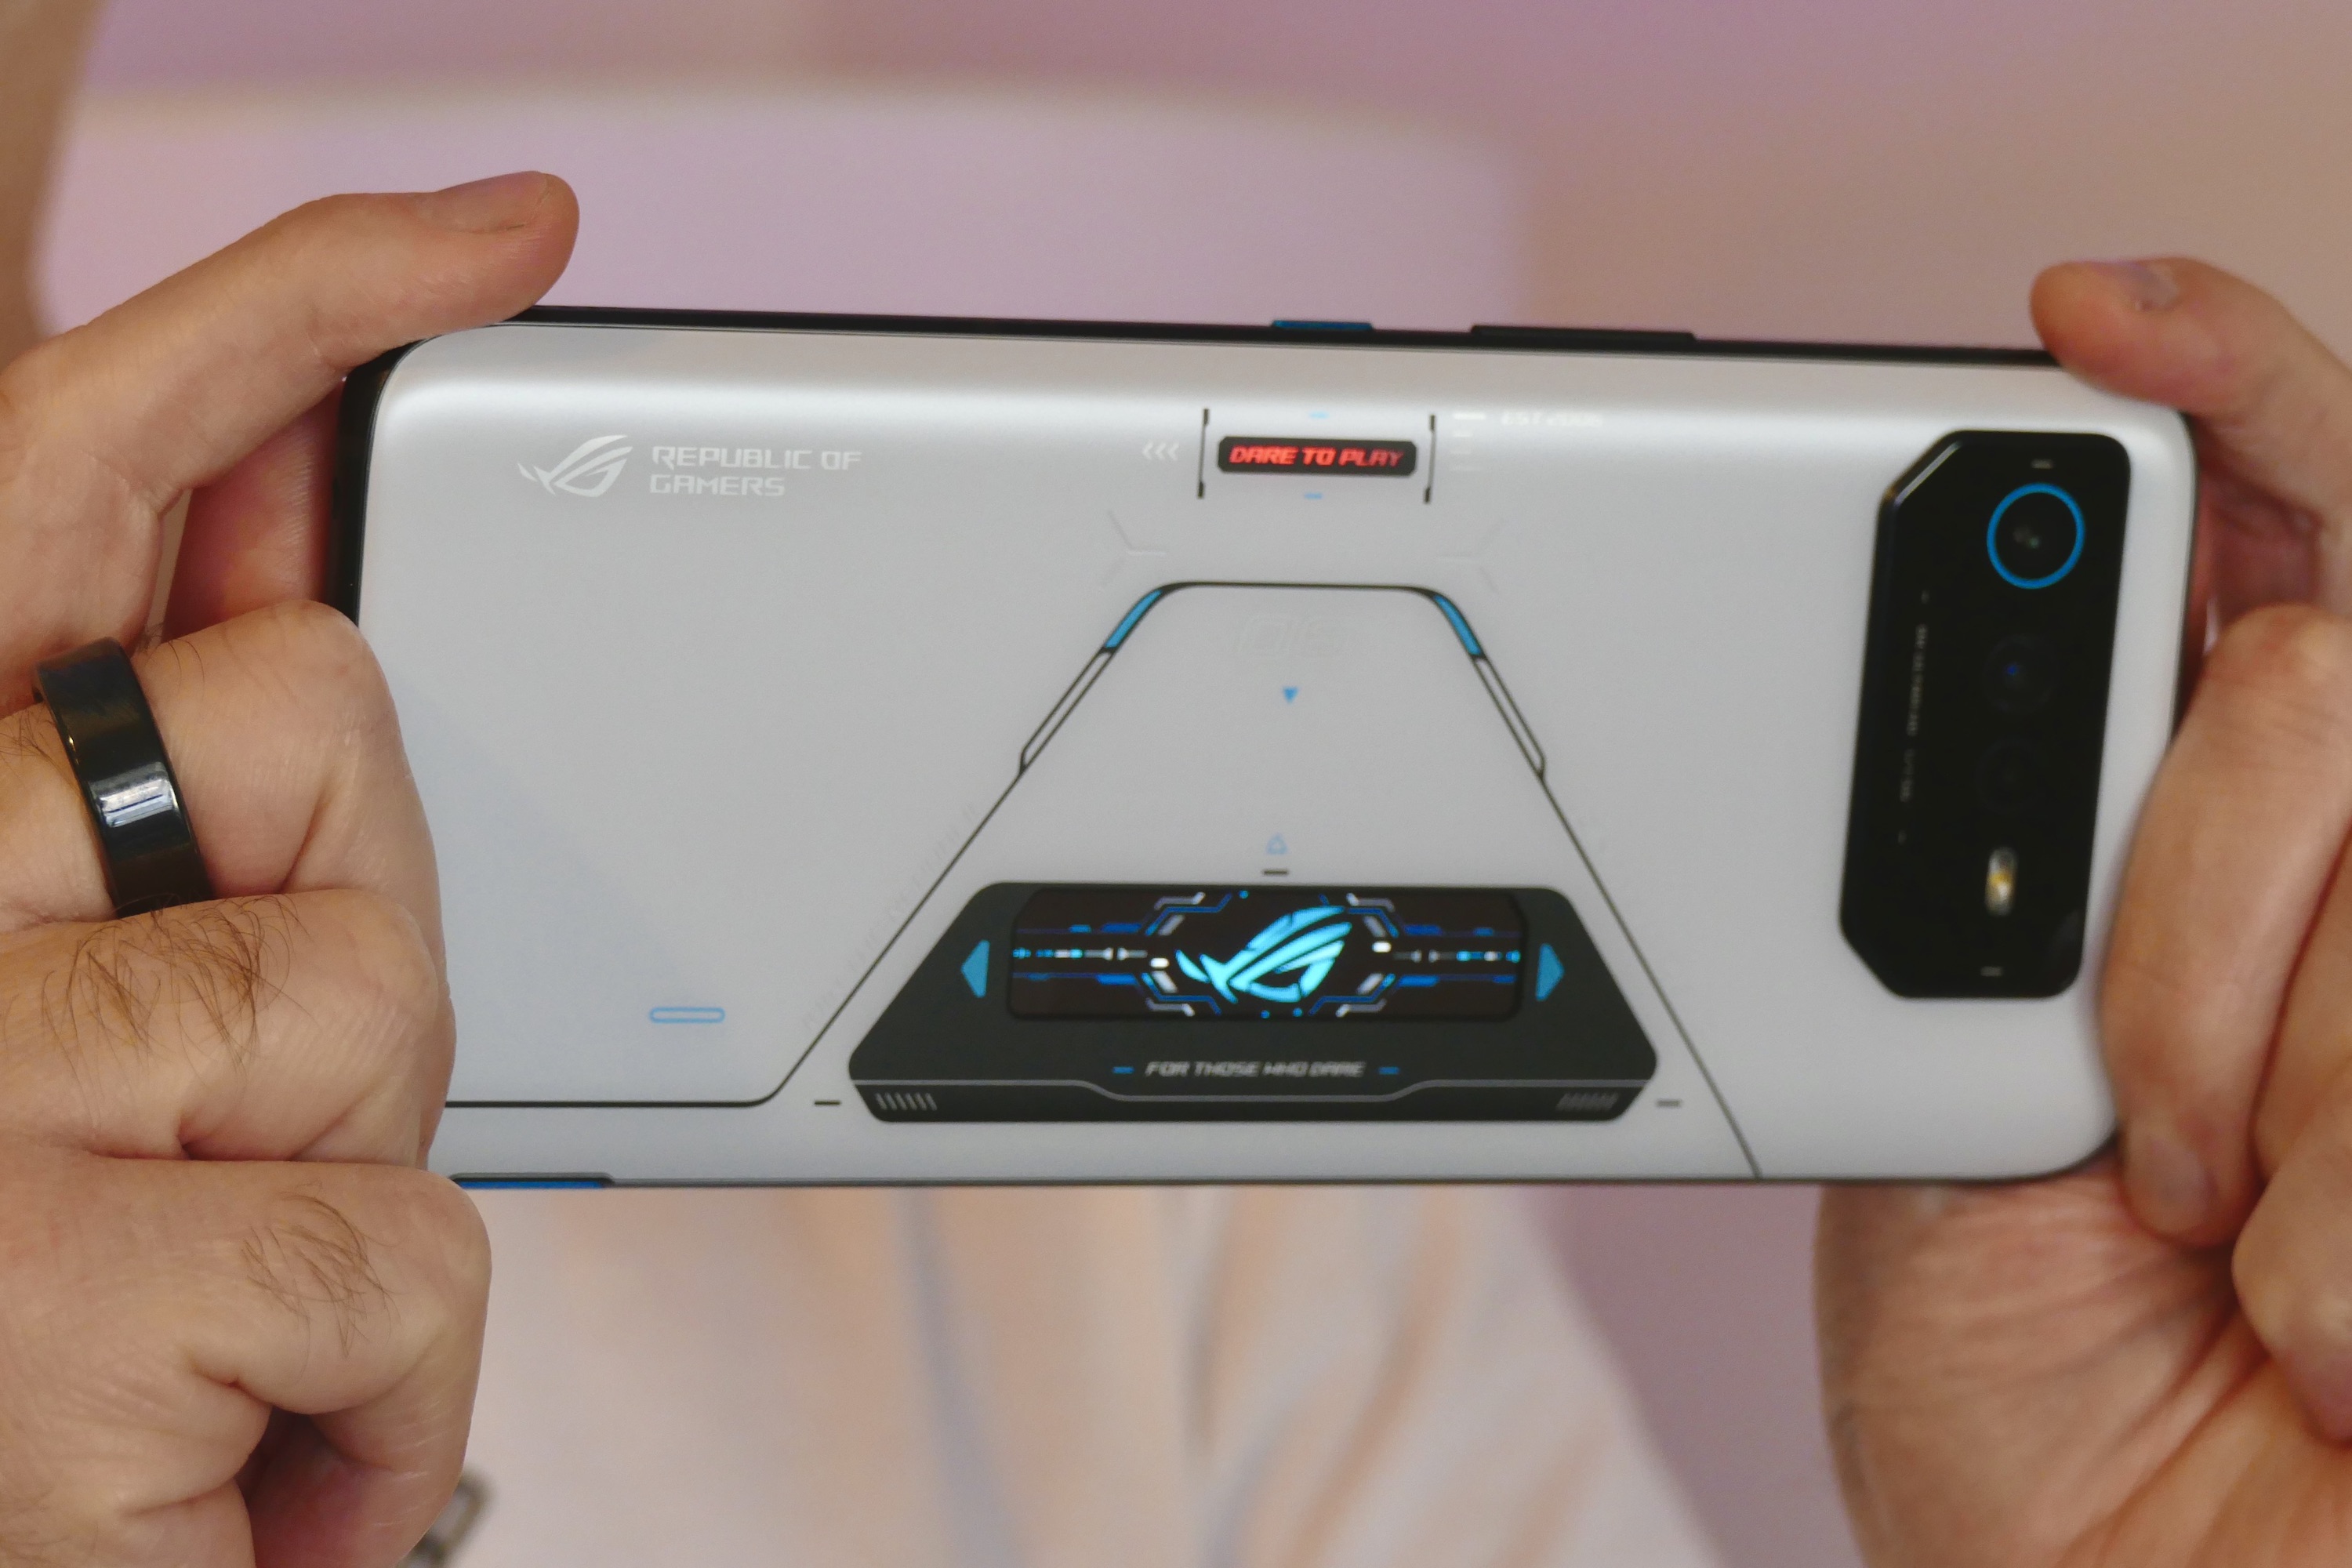 Asus ROG Phone 6 Pro hands-on: The new mobile gaming king